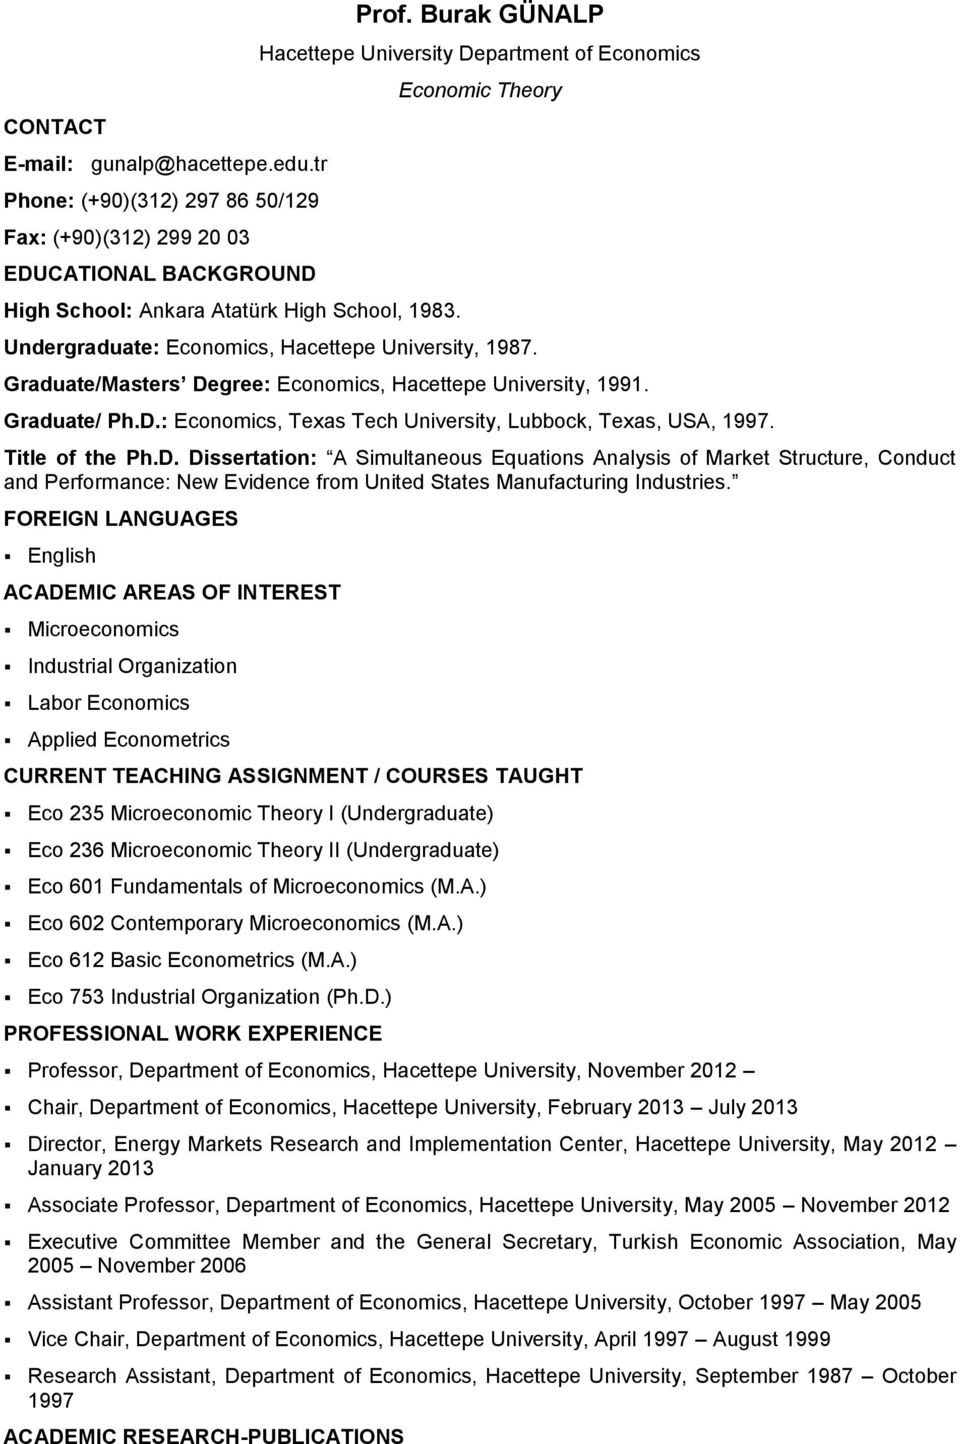 Graduate/ Ph.D.: Economics, Texas Tech University, Lubbock, Texas, USA, 1997. Title of the Ph.D. Dissertation: A Simultaneous Equations Analysis of Market Structure, Conduct and Performance: New Evidence from United States Manufacturing Industries.